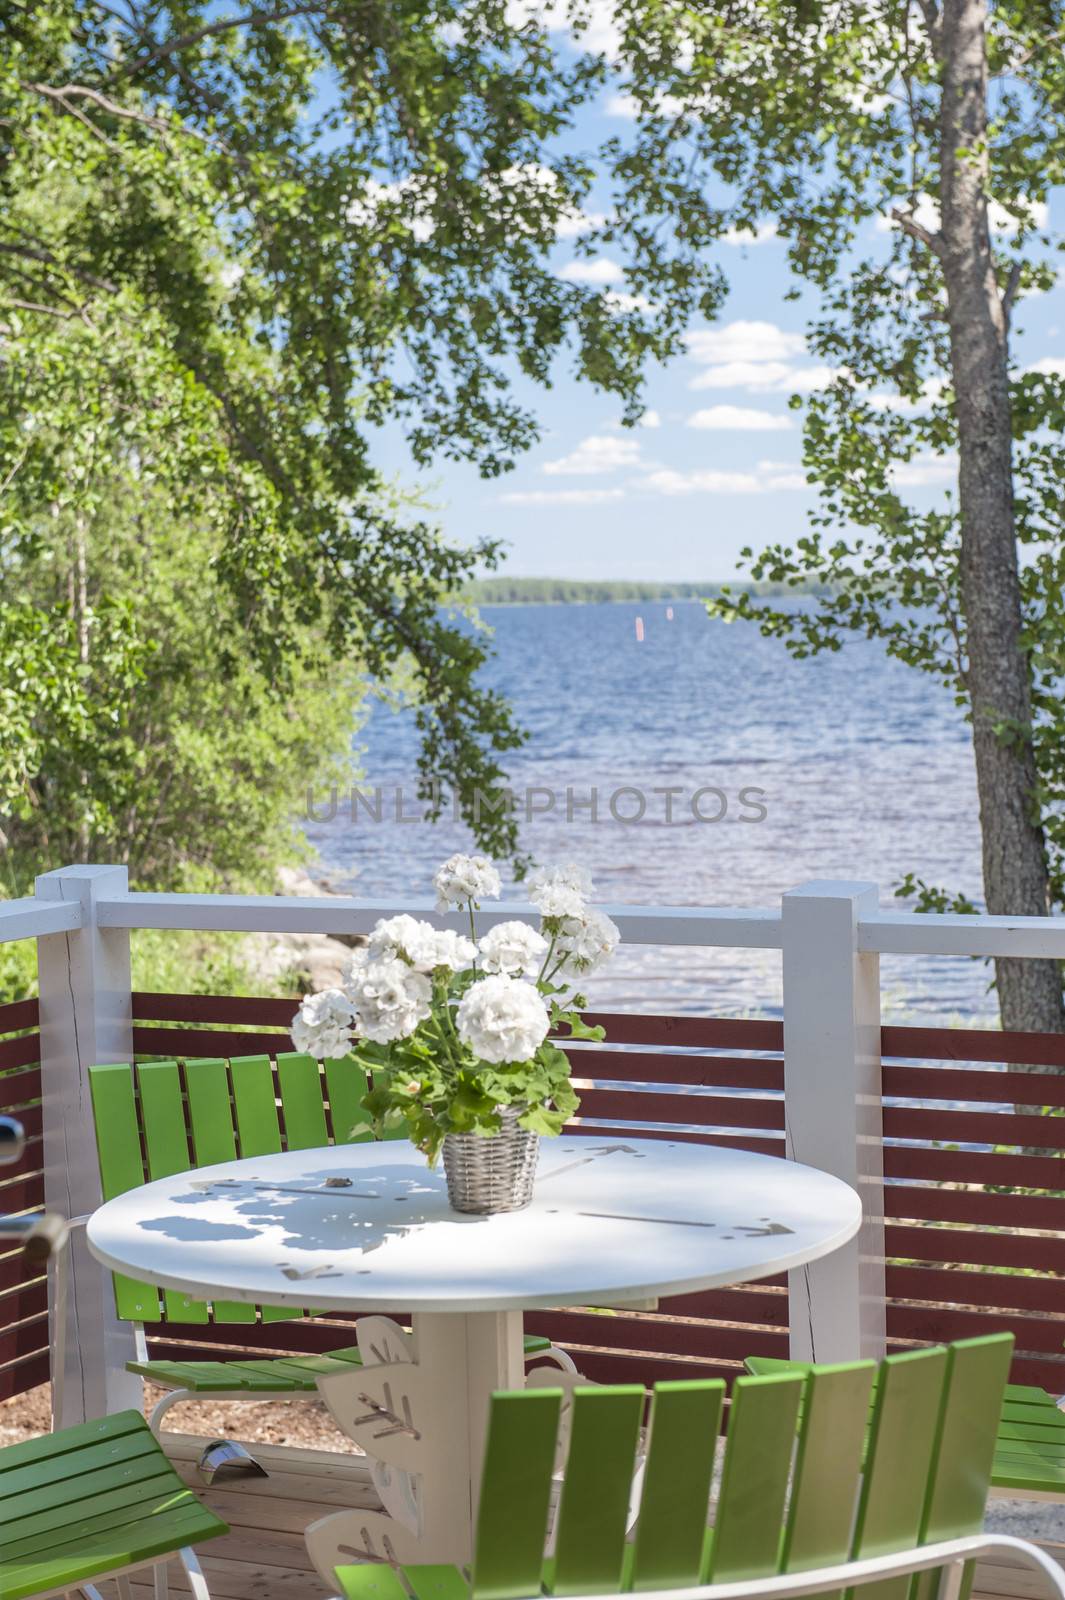 Summer terrace decorated with flowers, taken in Finland